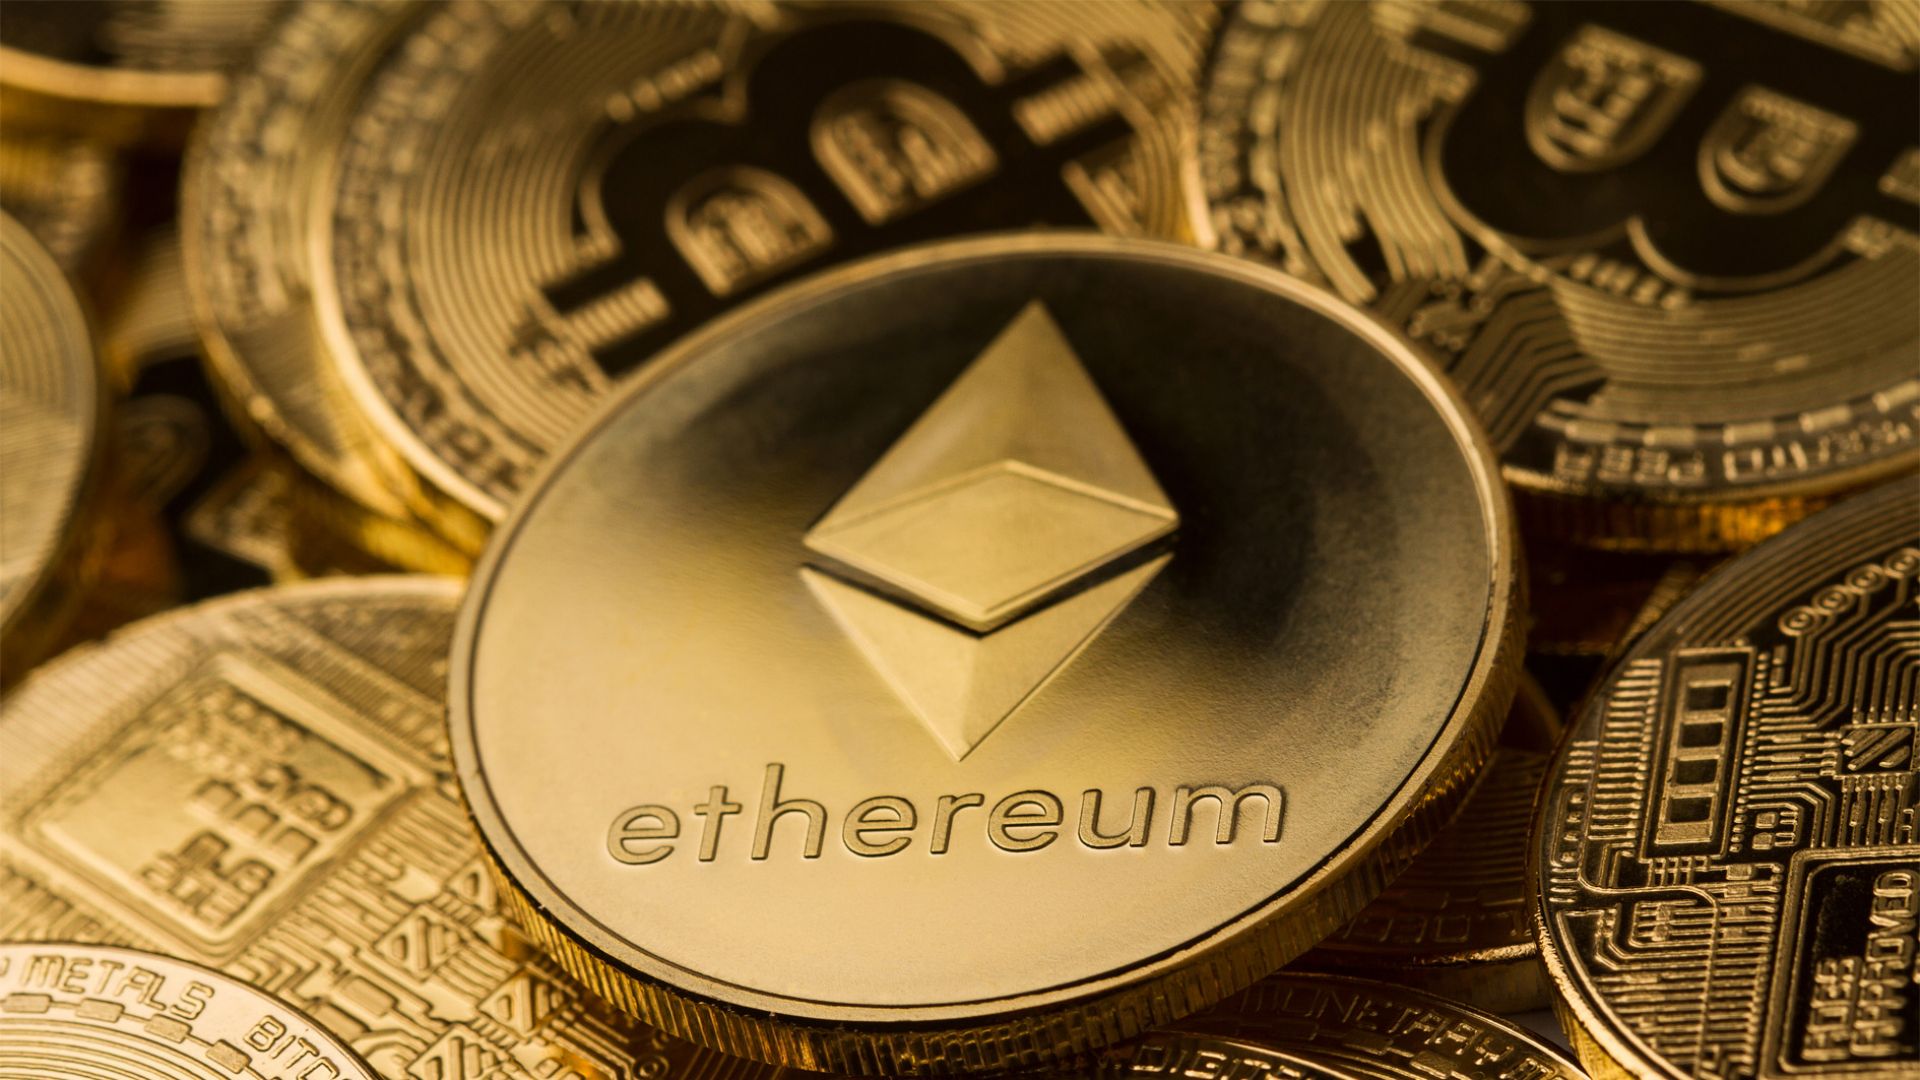 Ethereum celebrates 8th anniversary while Bitcoin mines its 800,000th block